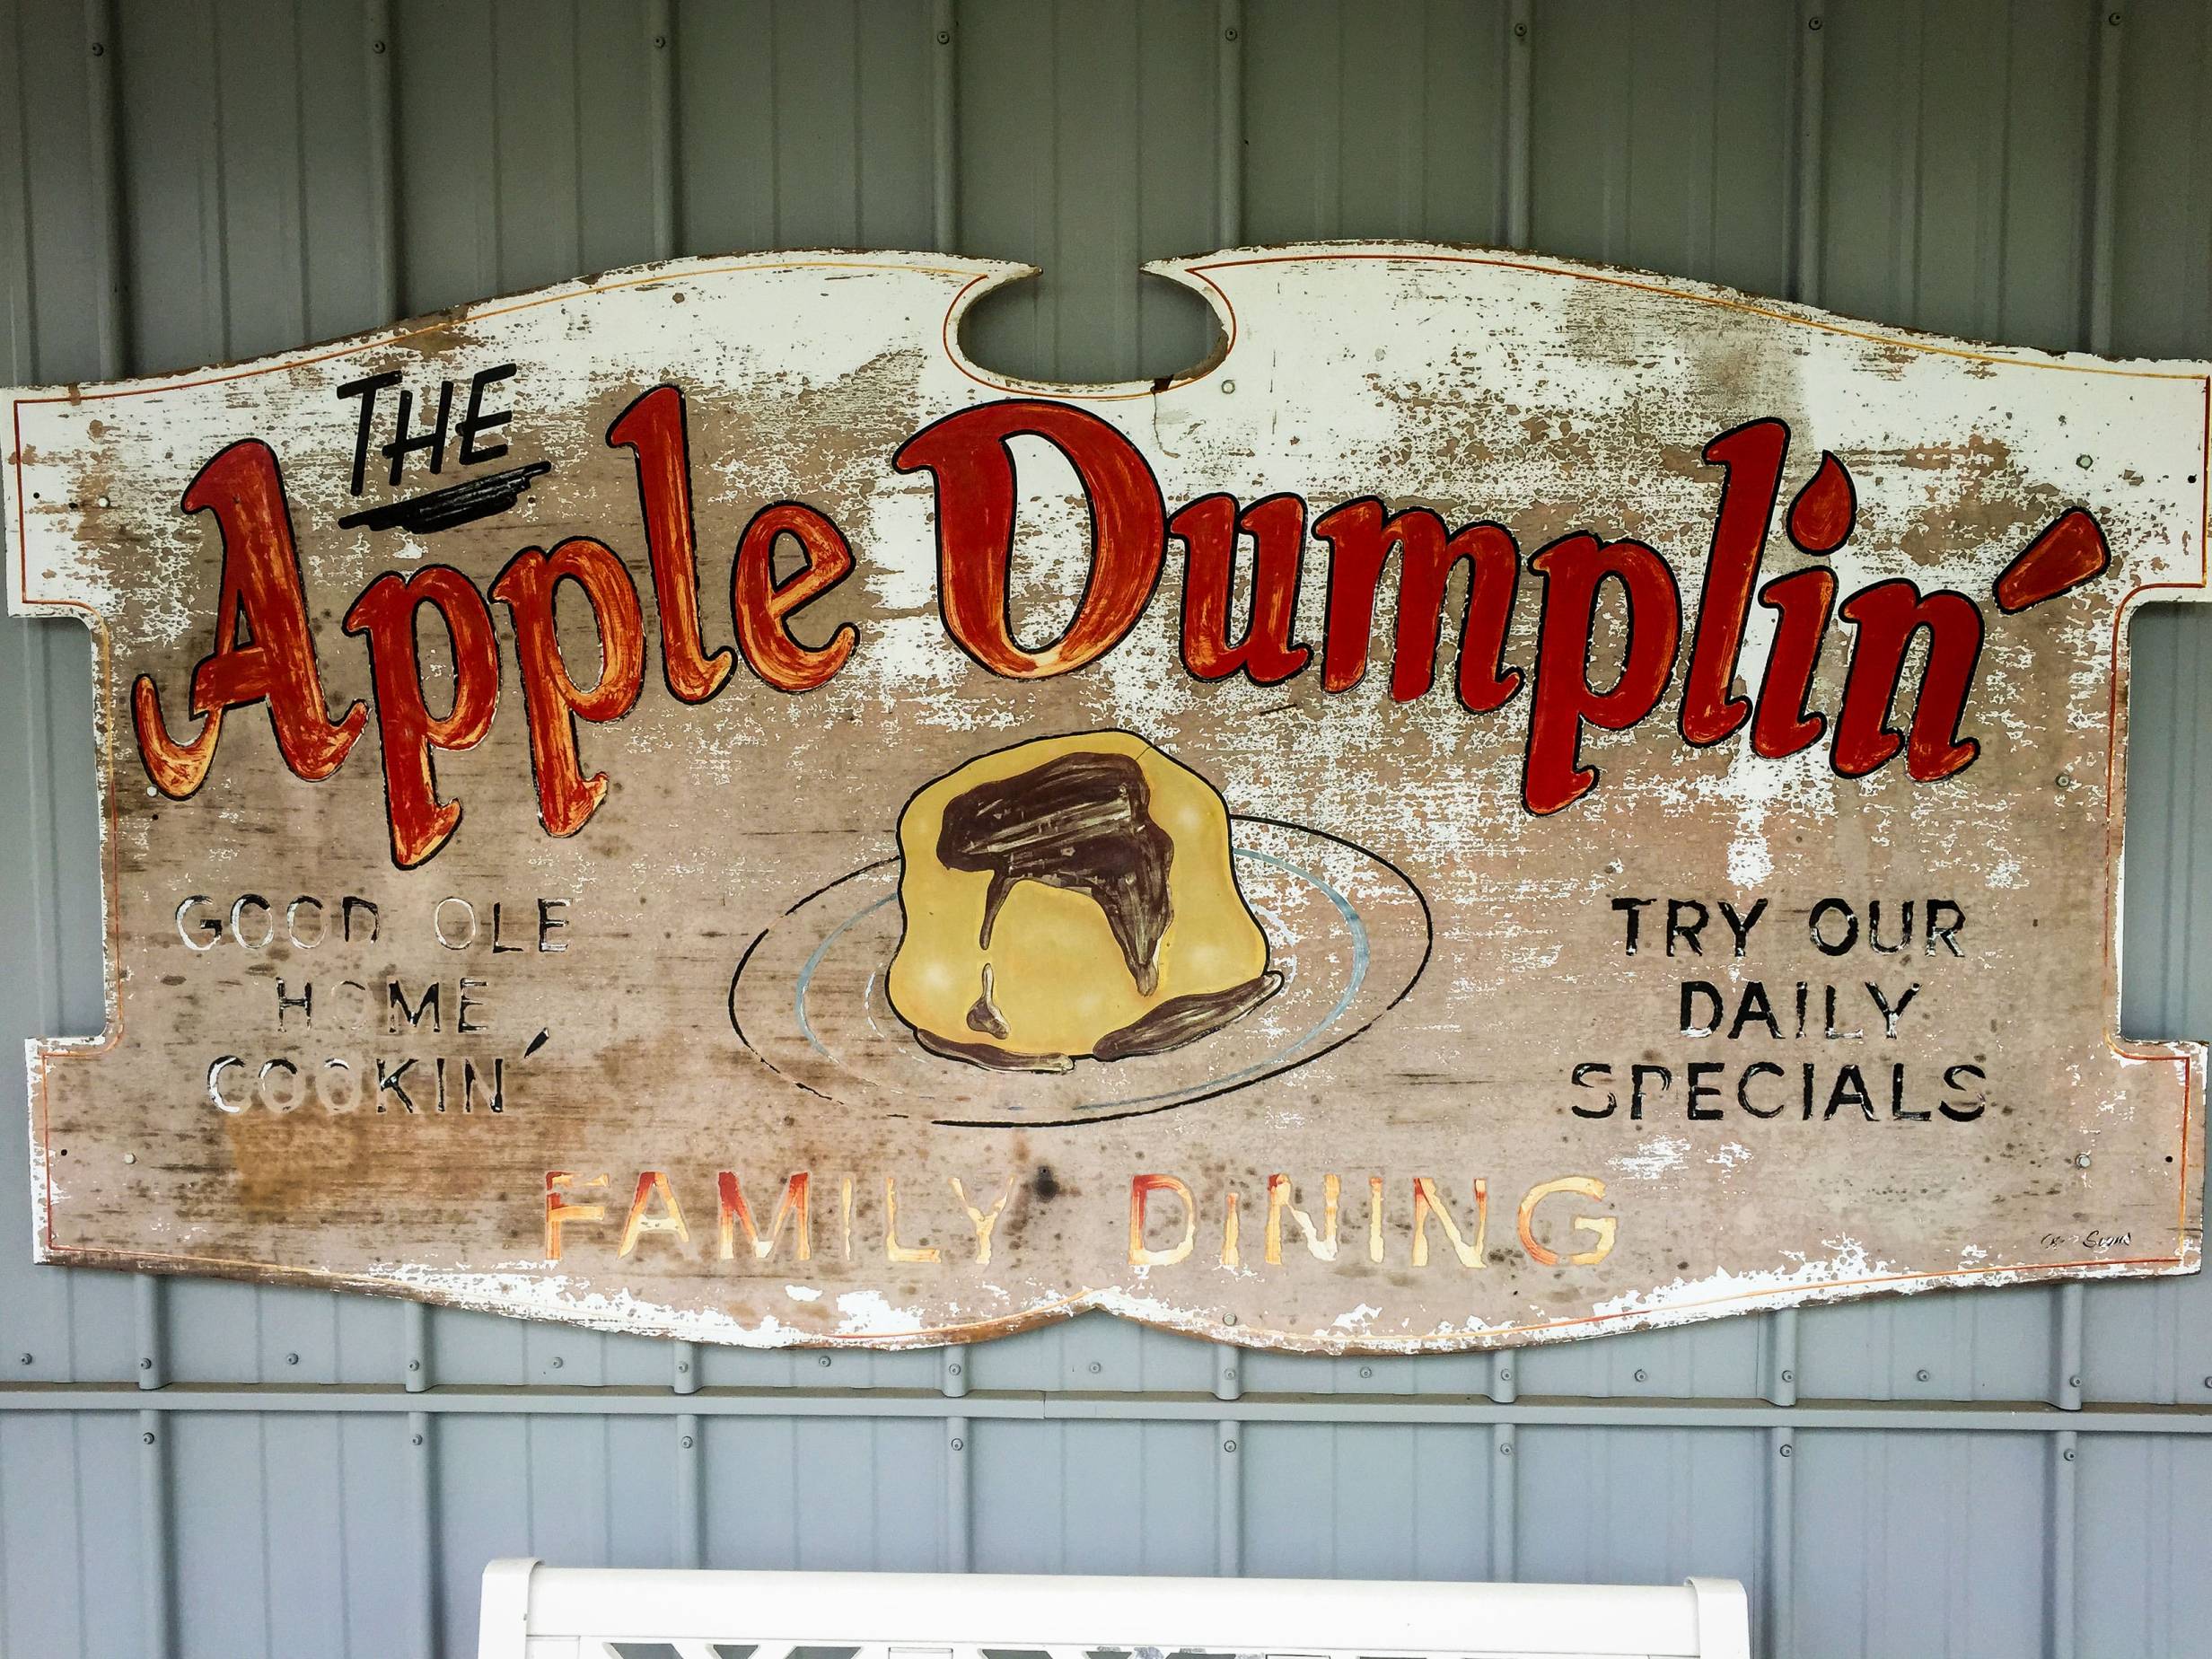 Apple Dumplin’: It’s not your grandma’s cooking…but it could be